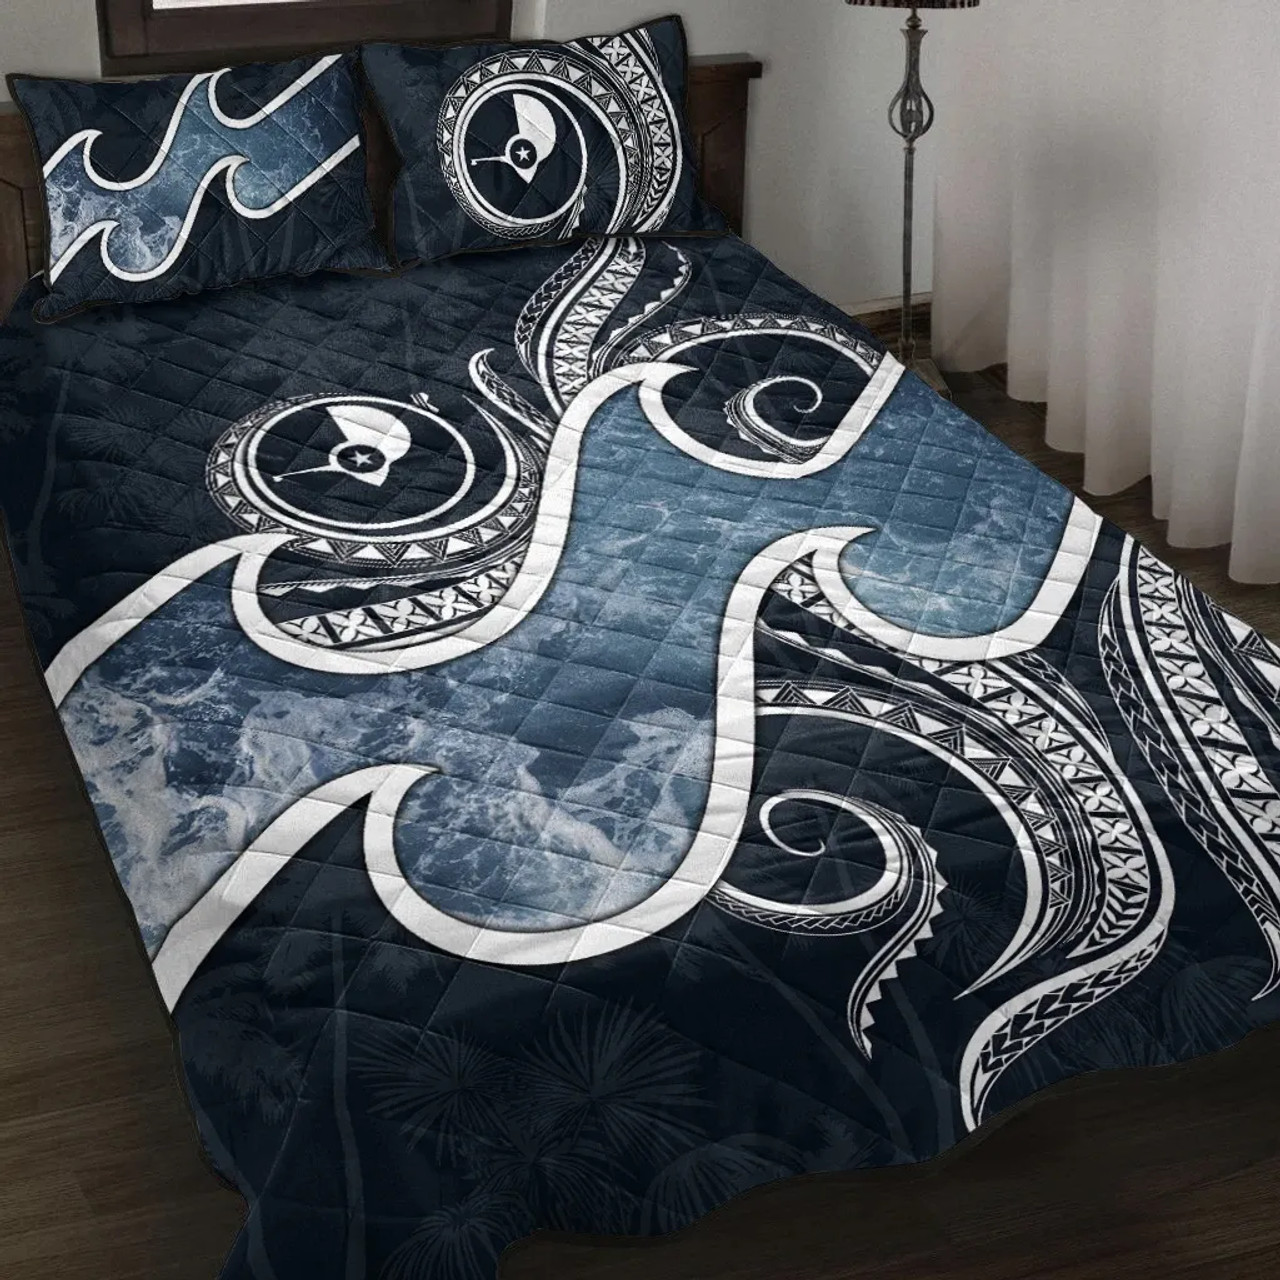 Yap Islands Polynesian Quilt Bed Set - Ocean Style 1